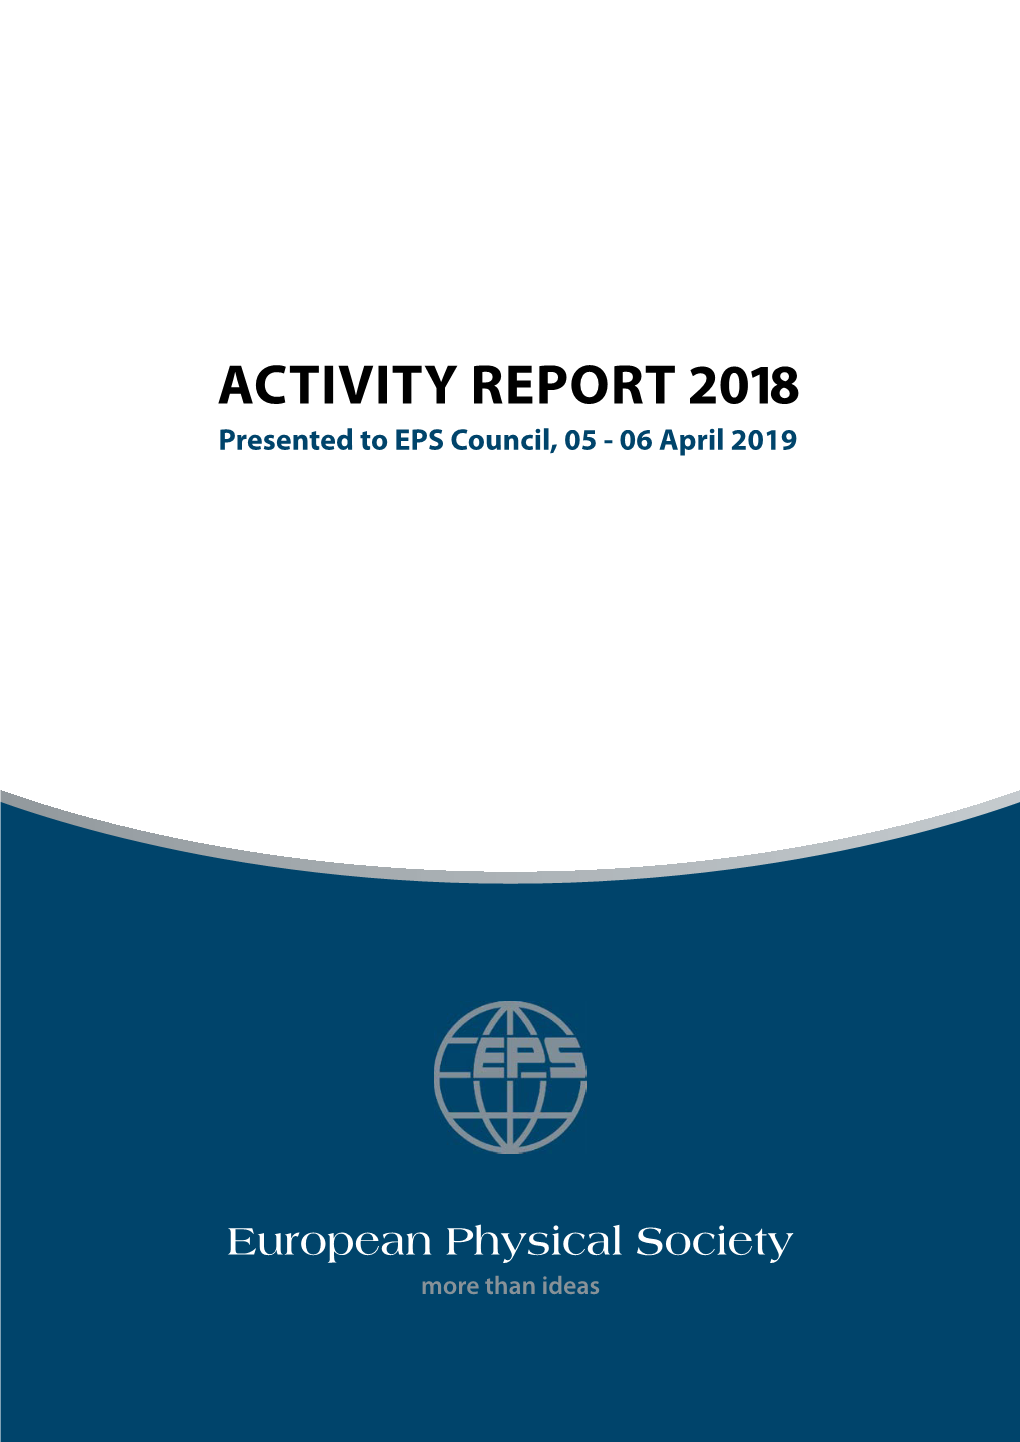 ACTIVITY REPORT 2018 Presented to EPS Council, 05 - 06 April 2019